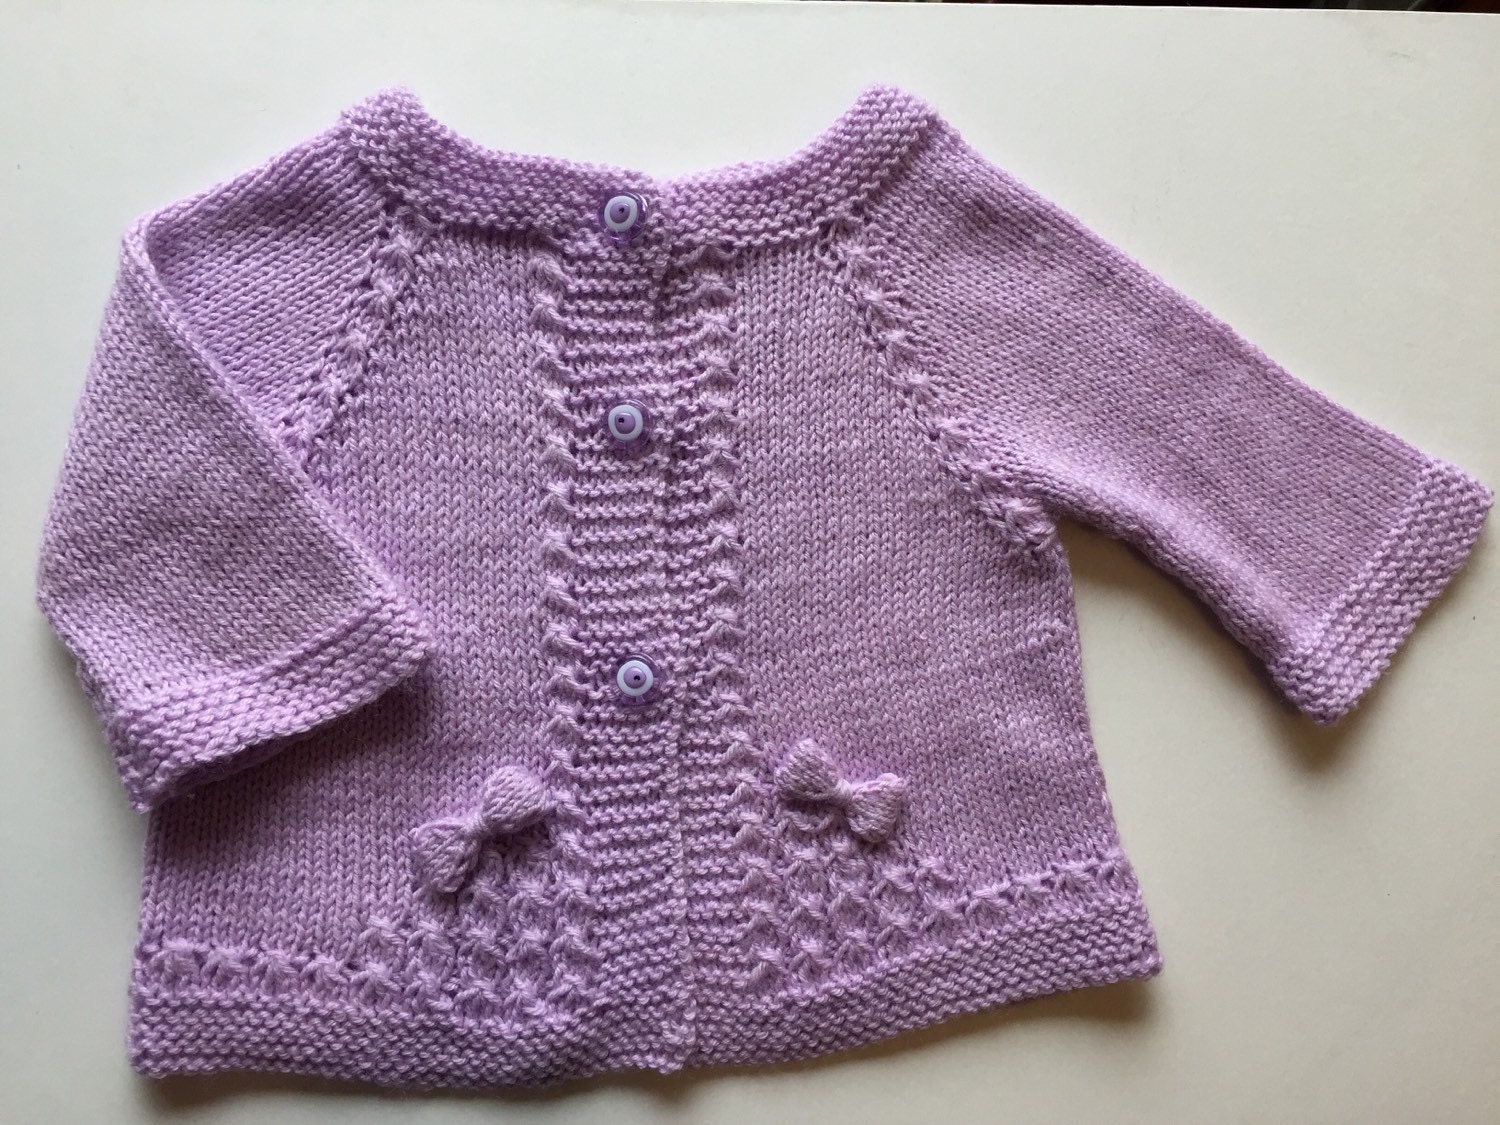 Handmade Knitted Lilac Wool Baby Girl Cardigan With Bow Ties - Etsy